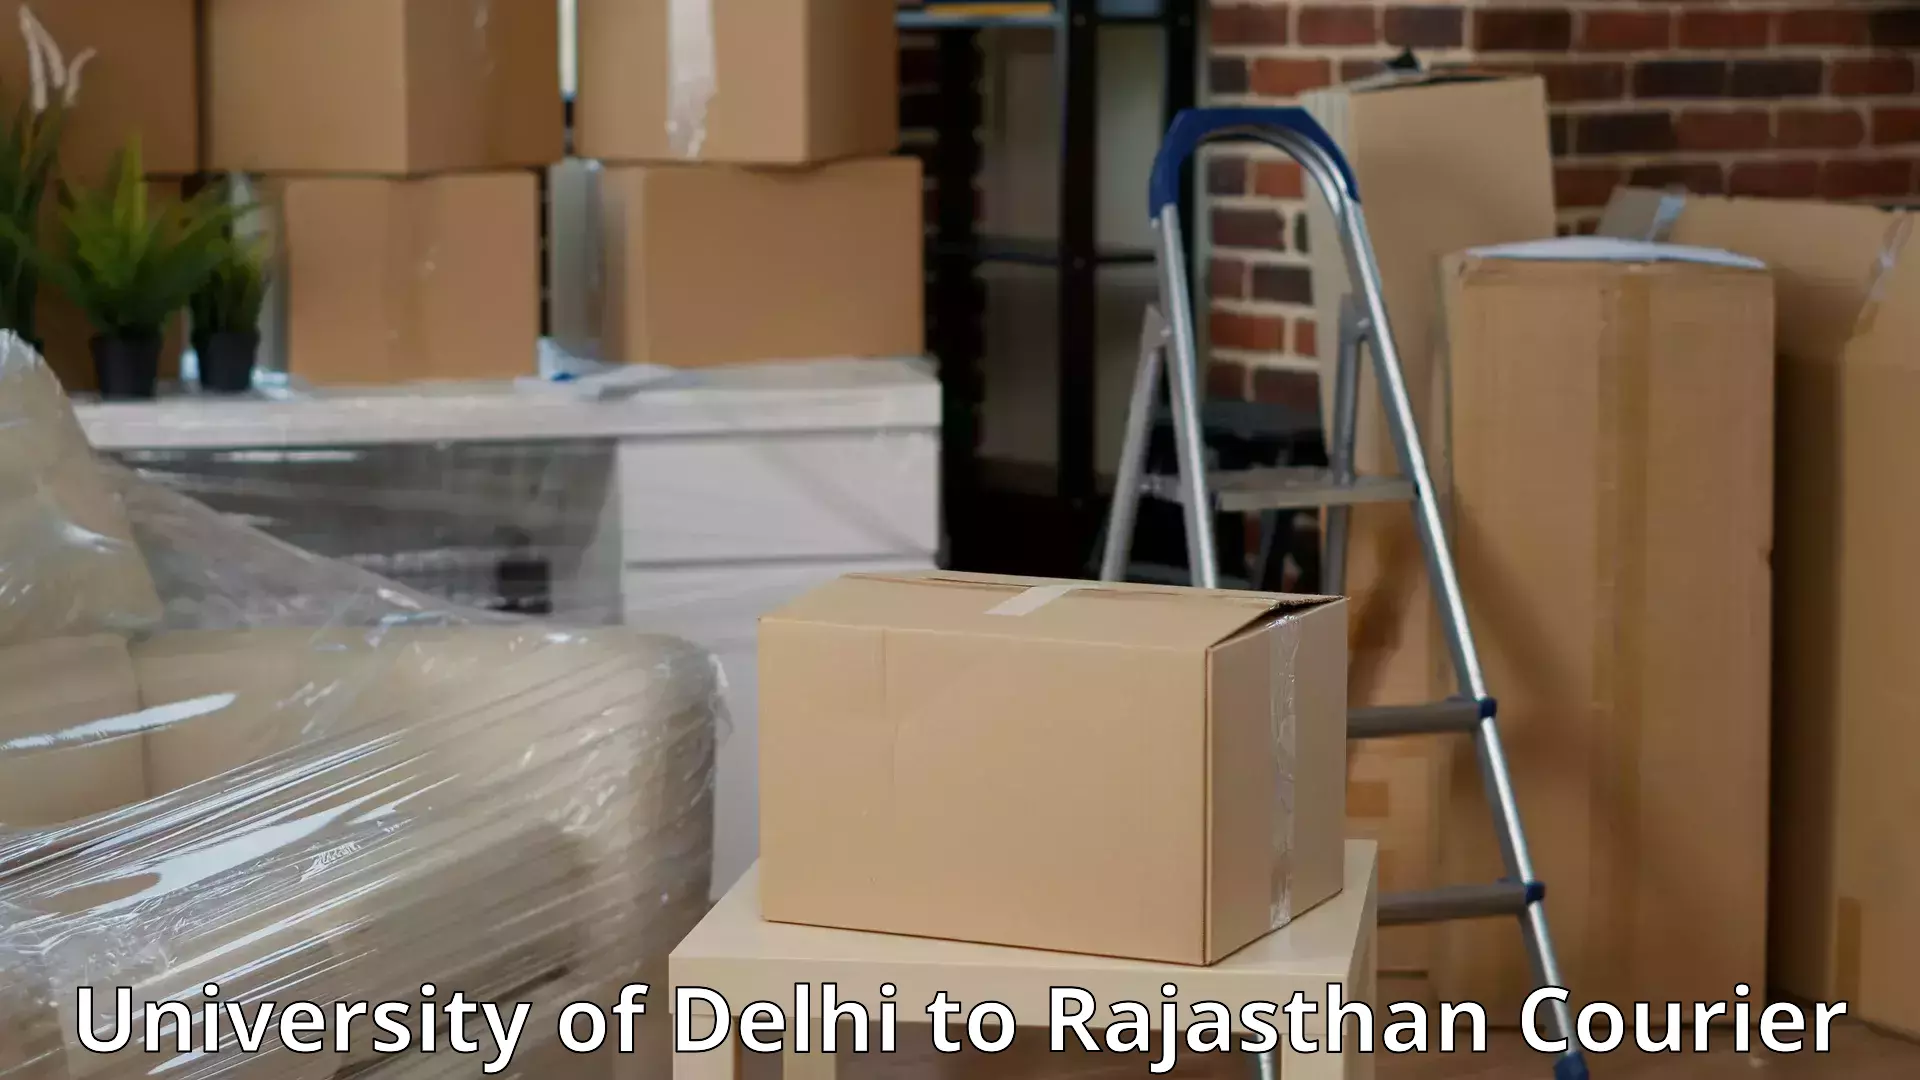 Quality relocation services University of Delhi to Rajasthan